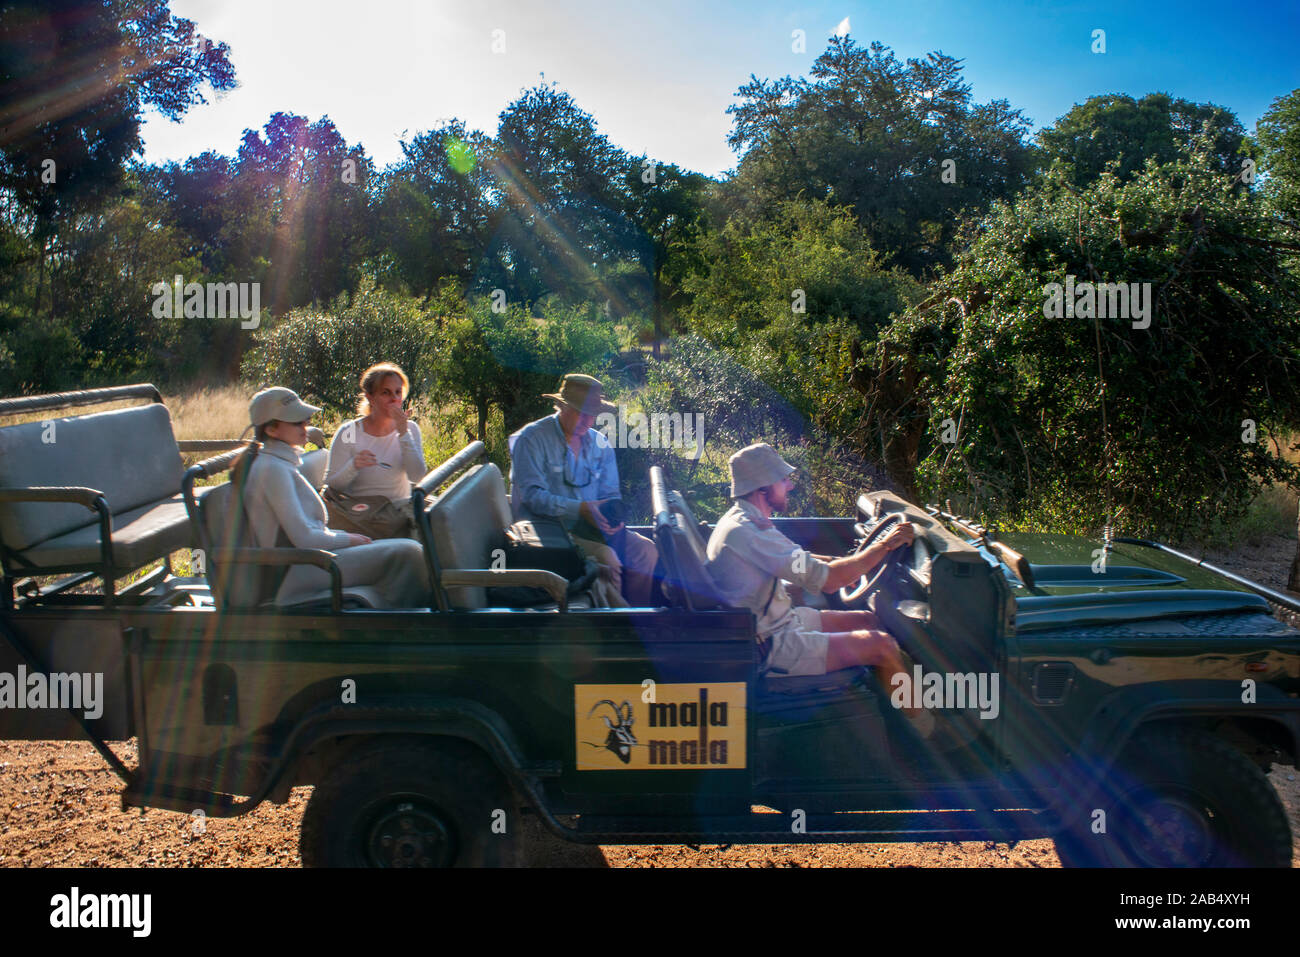 Safari car vehicle with tourists in Mala Mala Game Reserve Sabi Sand Park Kruger South Africa, Africa Stock Photo